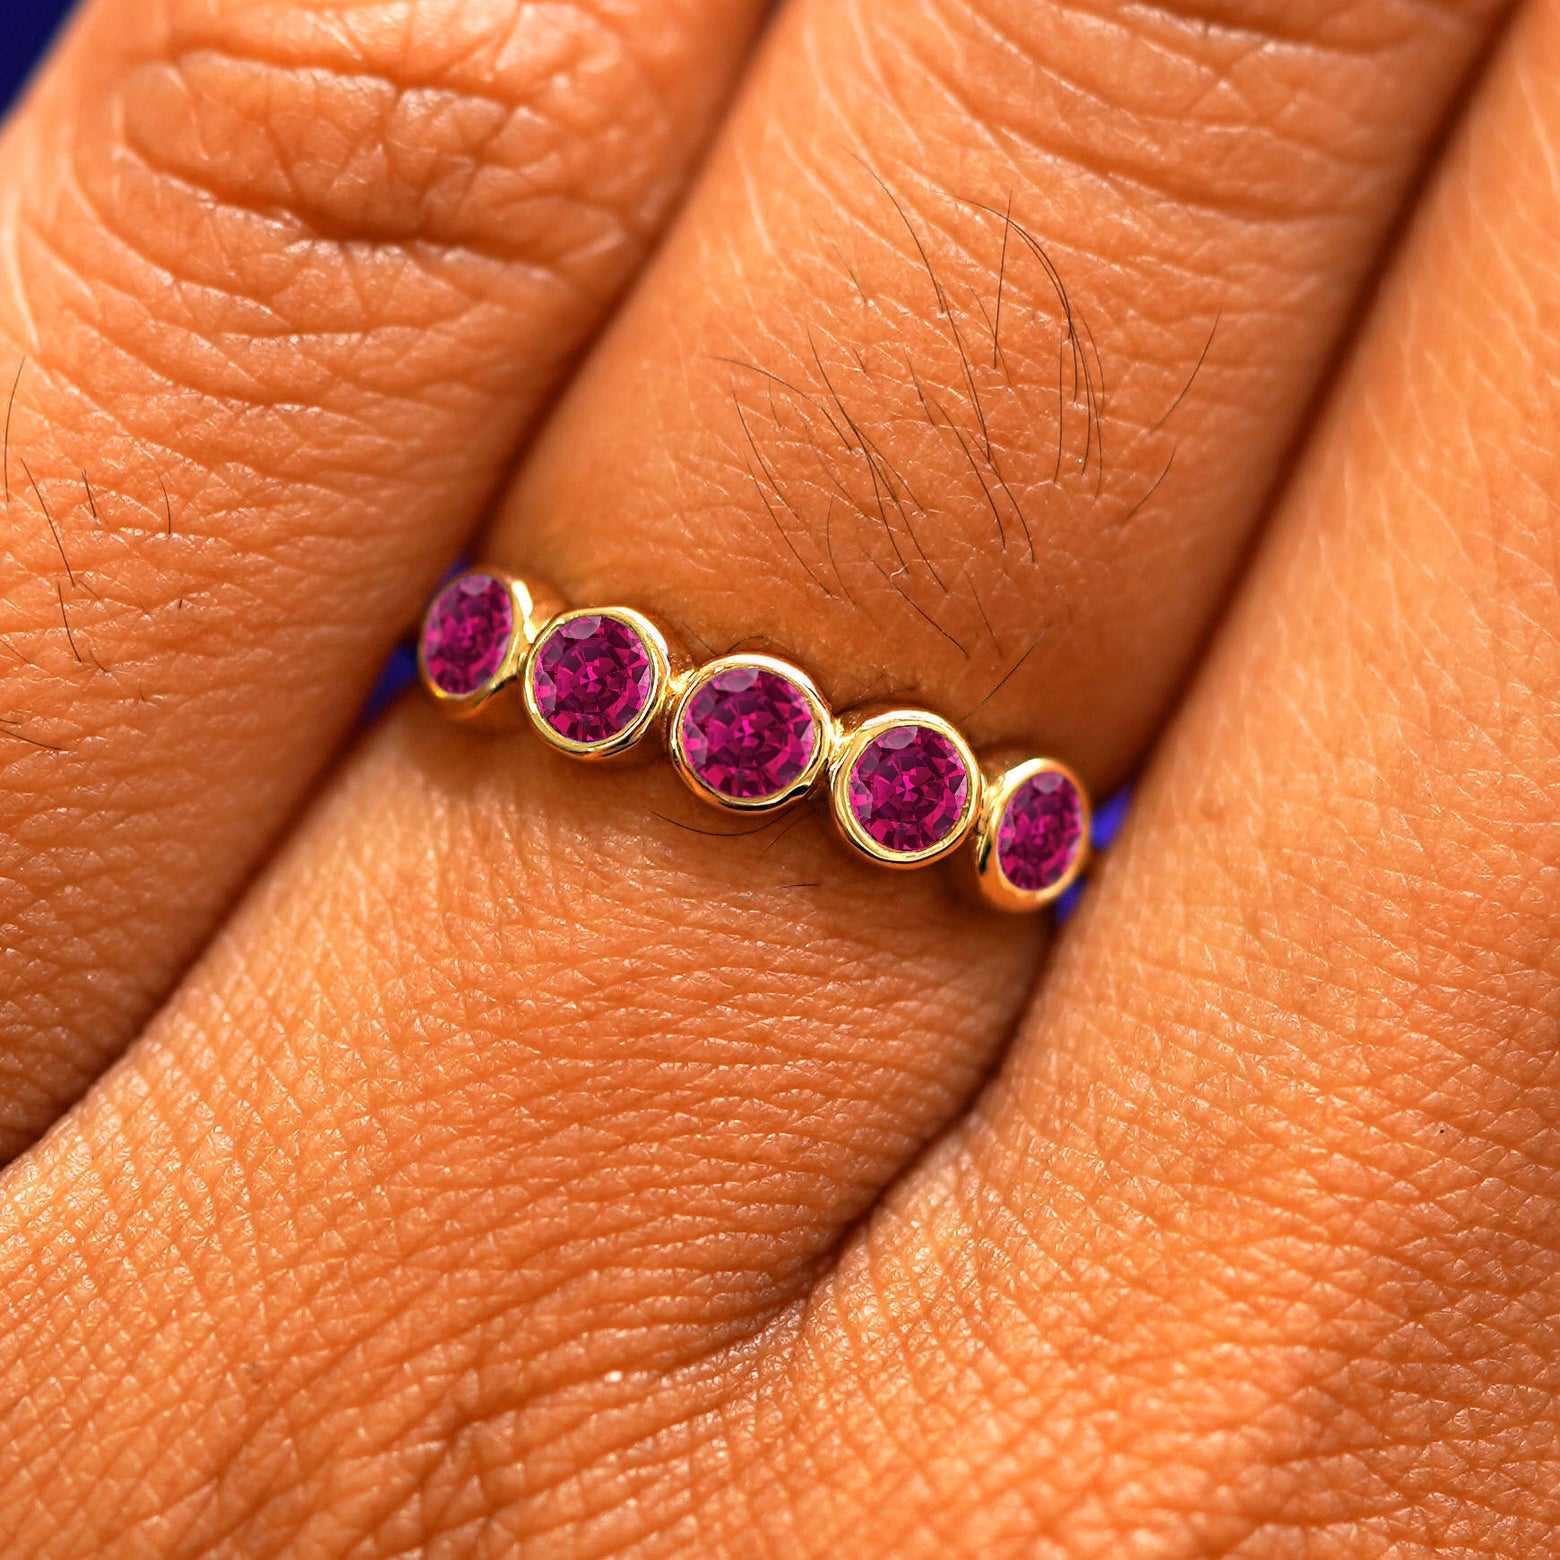 Close up view of a model's hand wearing a yellow gold 5 Gemstones Ring in ruby